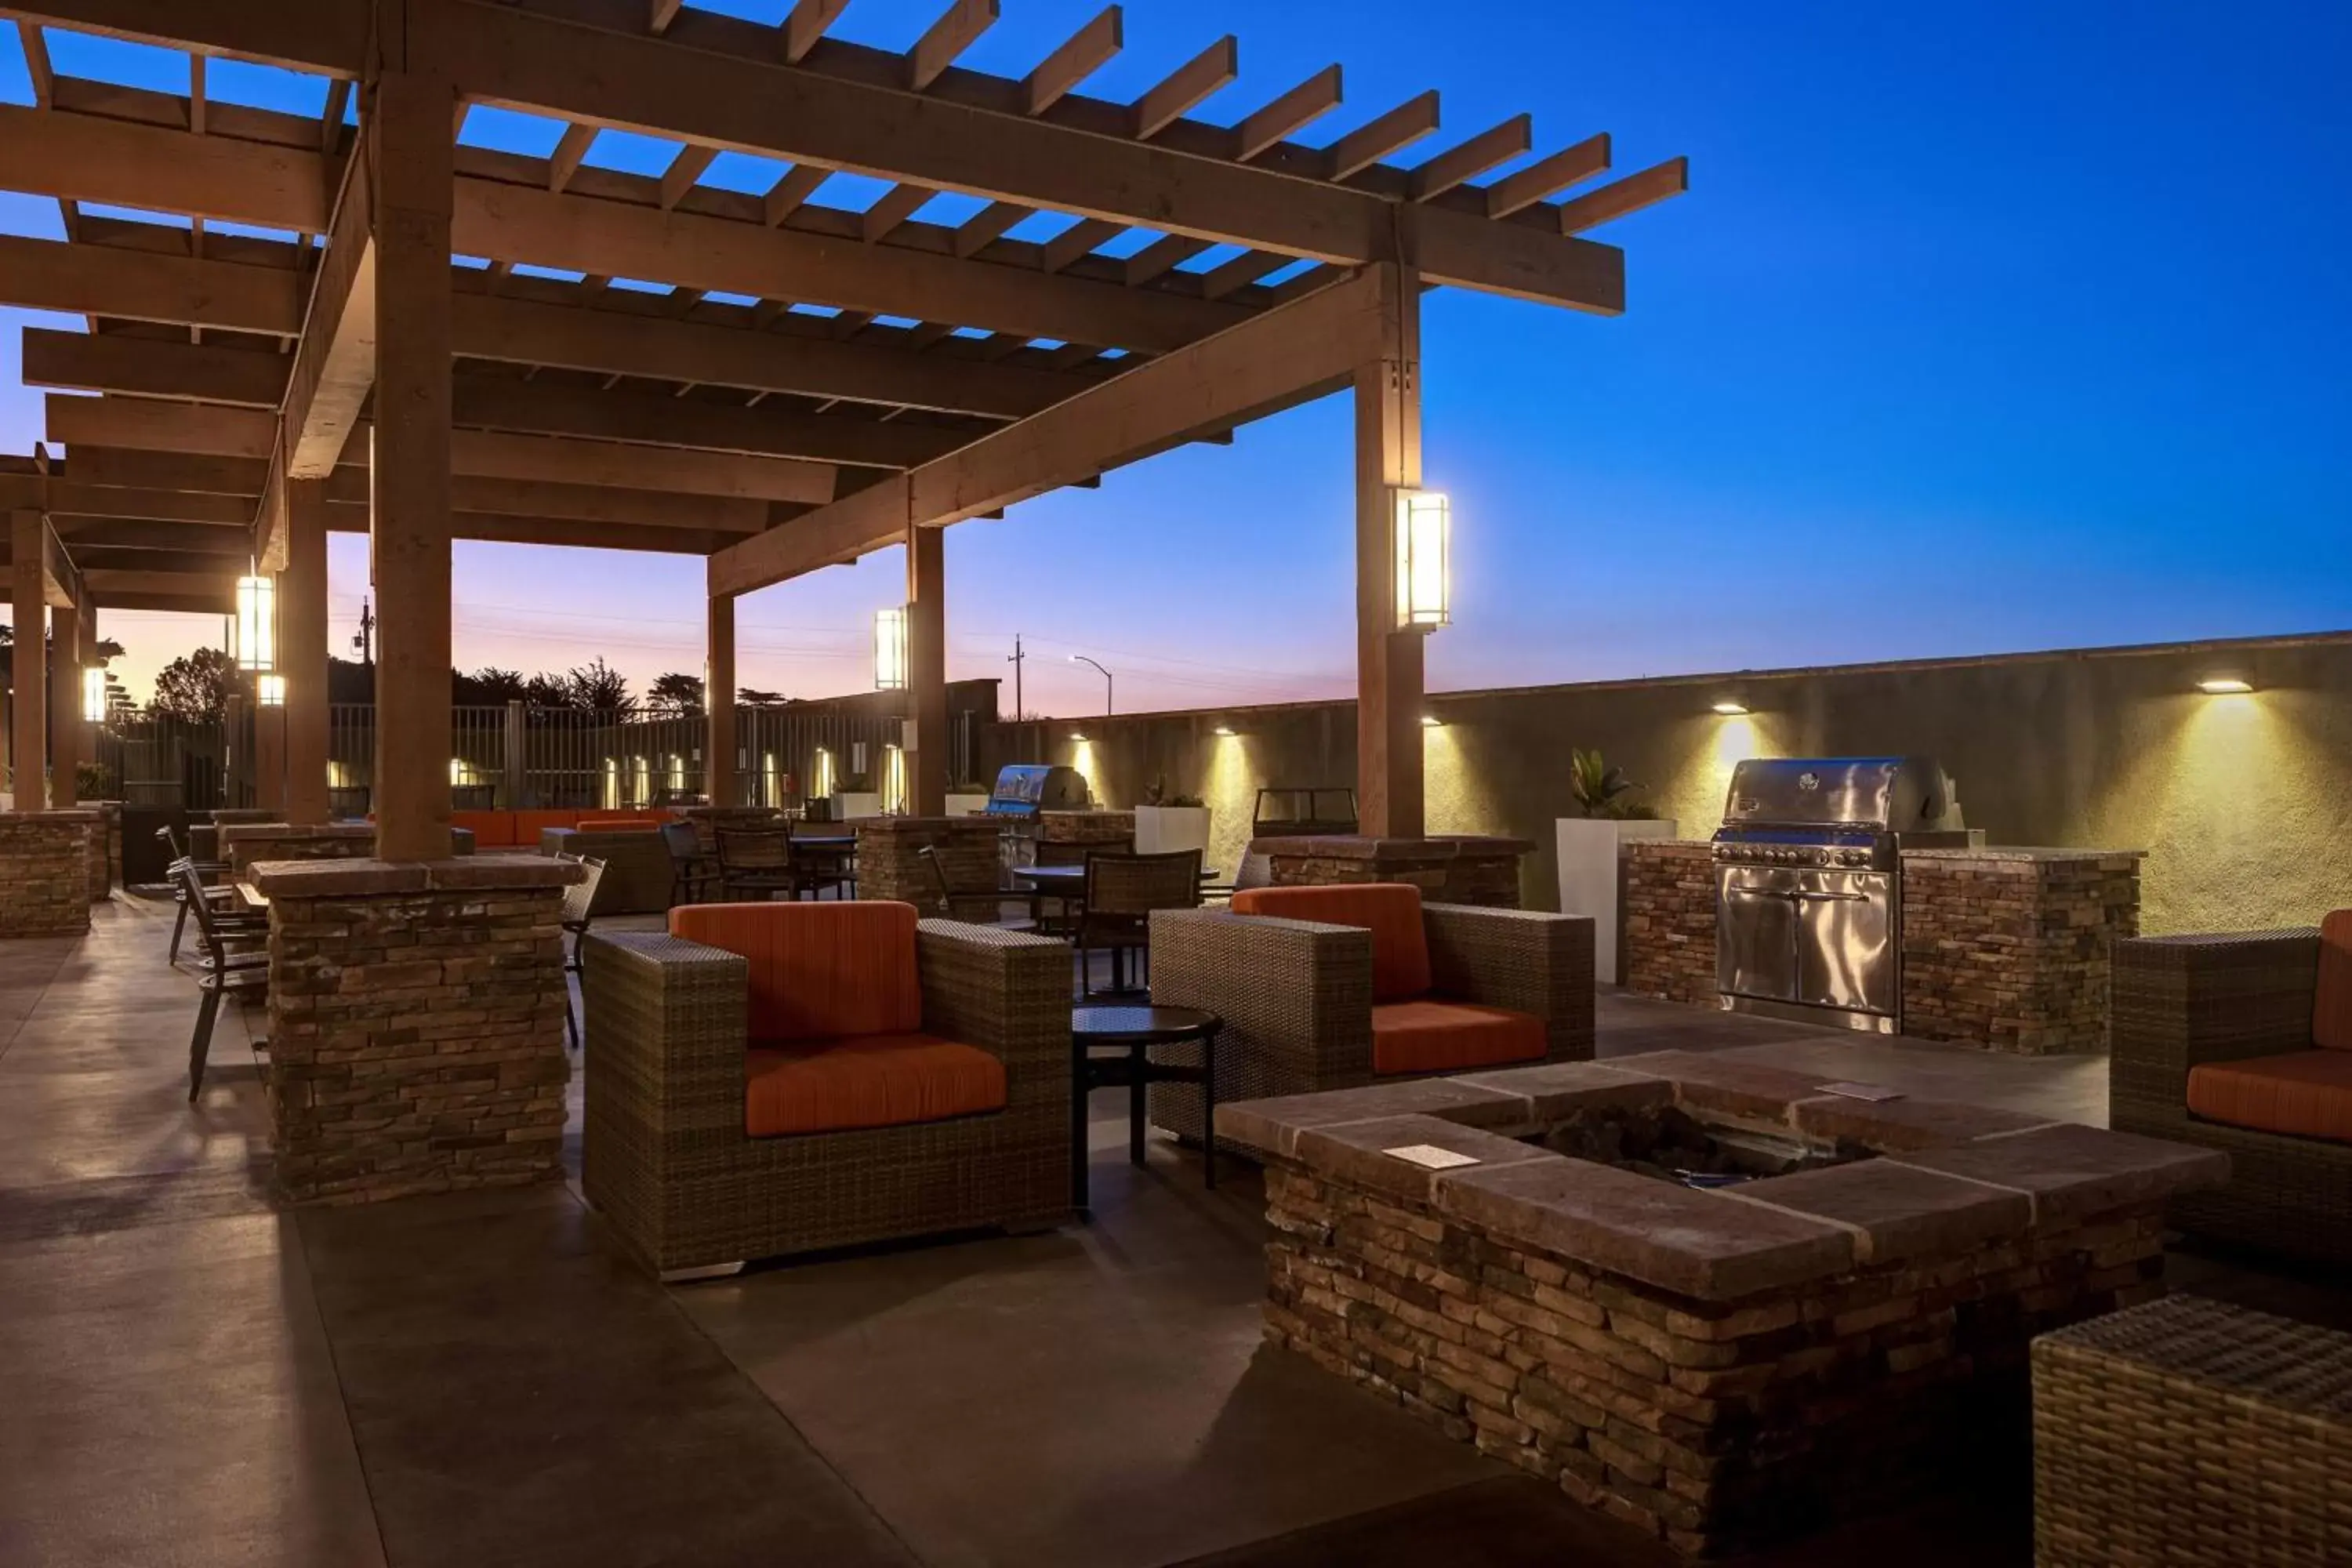 Property building in TownePlace Suites by Marriott San Luis Obispo